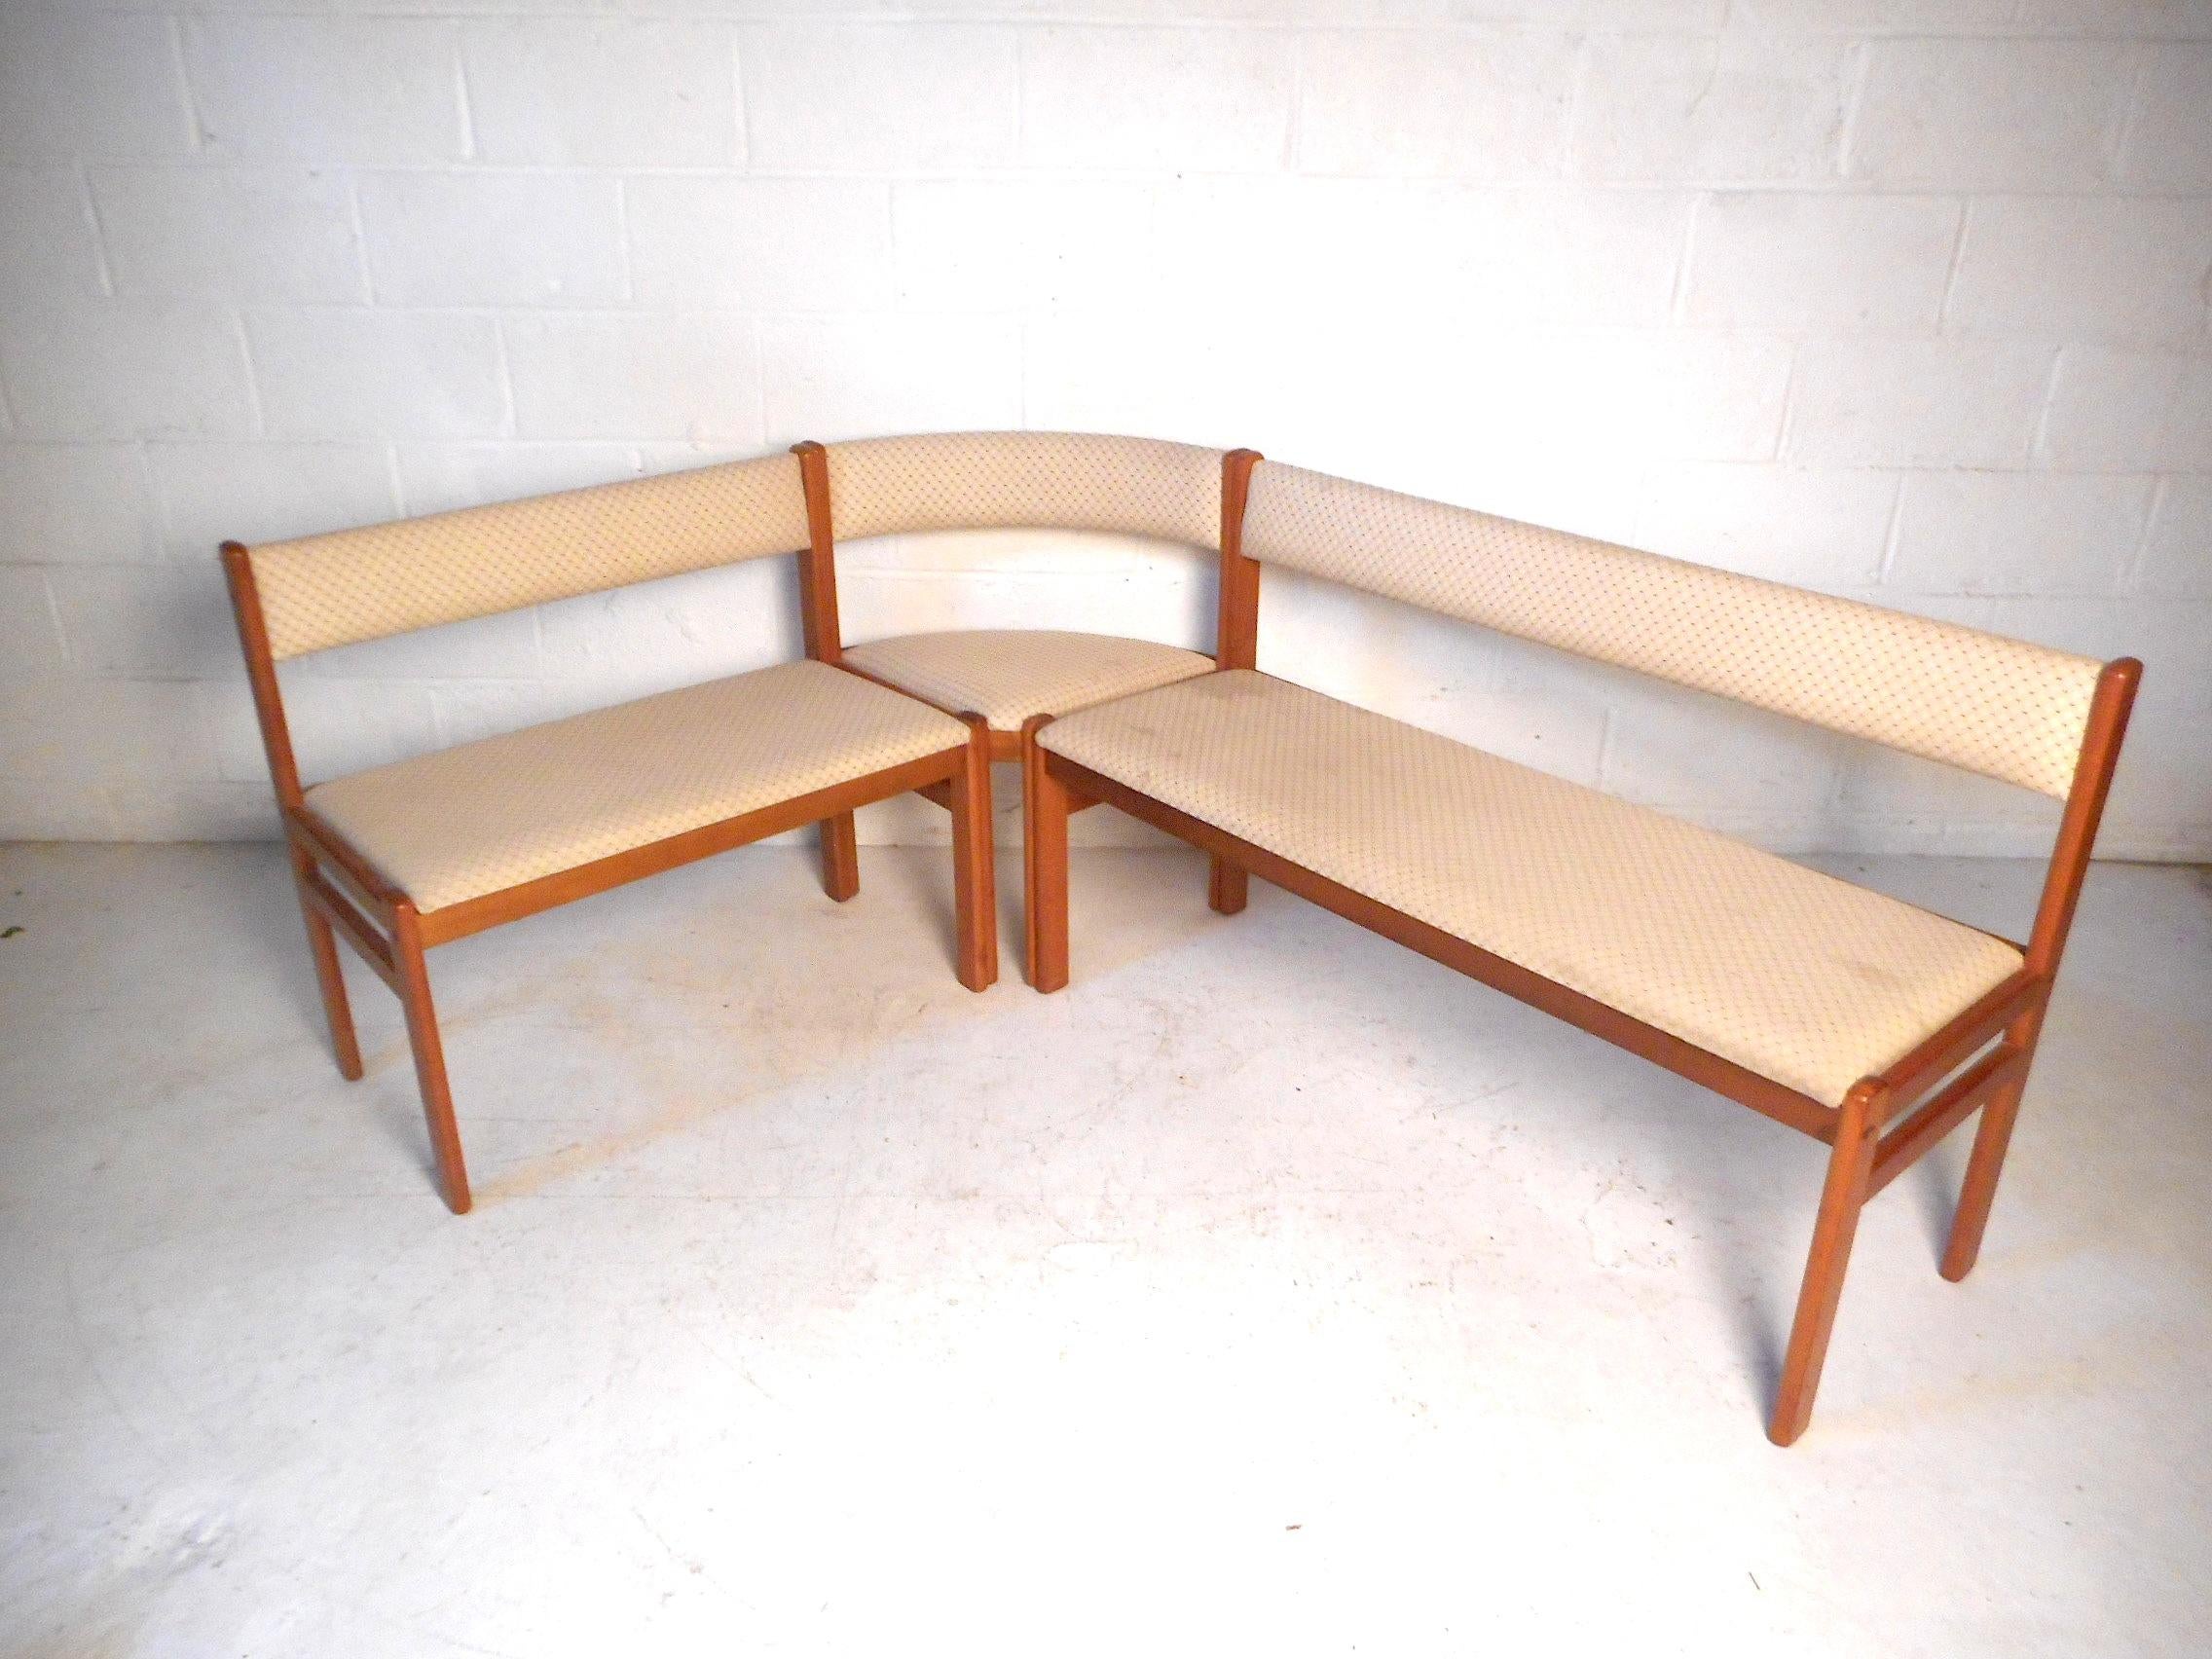 This unusual midcentury sectional bench features beautifully patterned upholstery and teak wood frames. Four pieces in all (two benches, a corner chair, and a single chair), this set can be assembled all together or placed separately, either way it